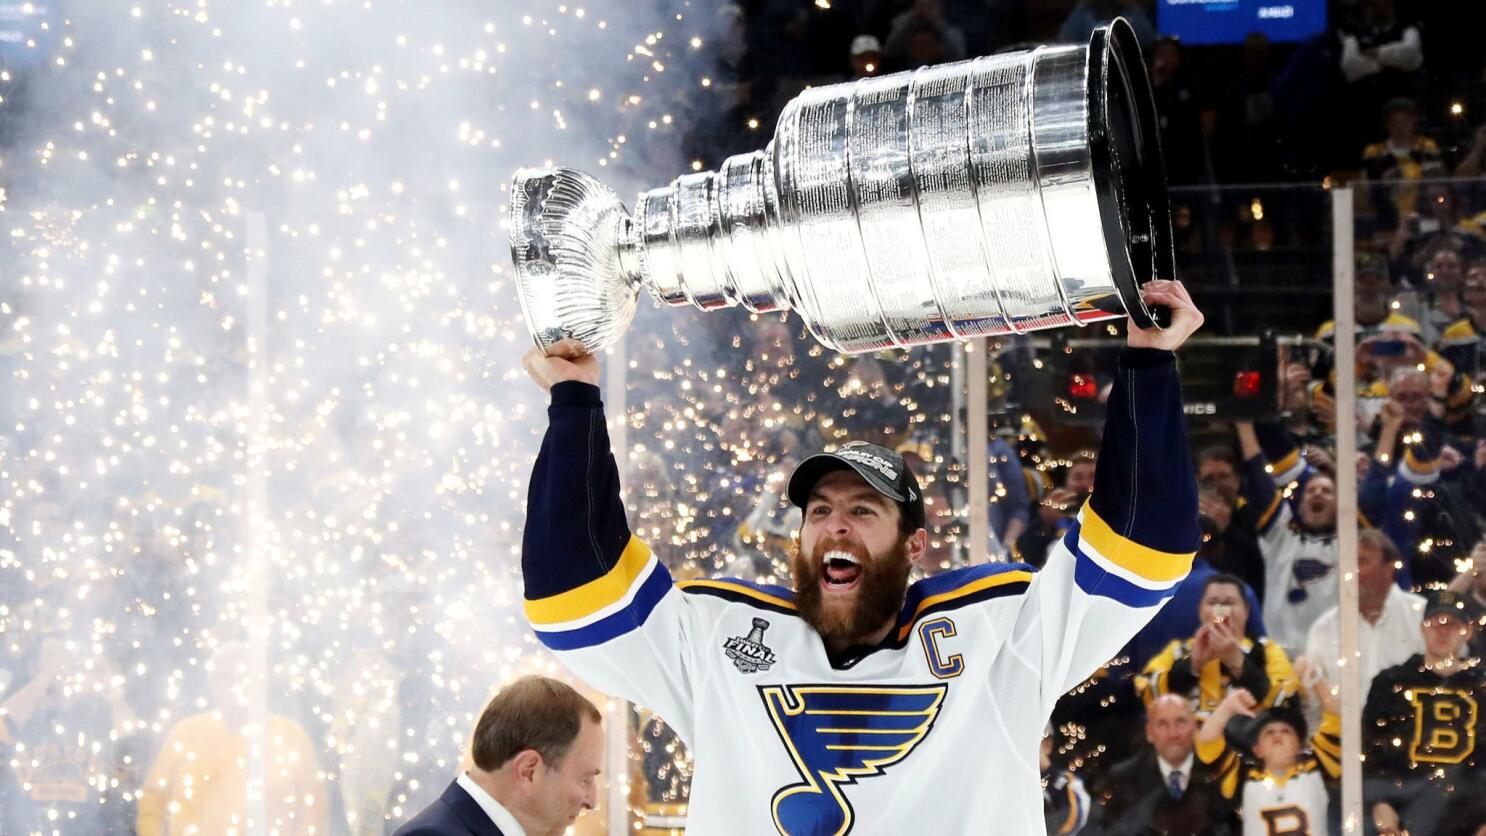 Relive The Run: The St. Louis Blues became Stanley Cup champions